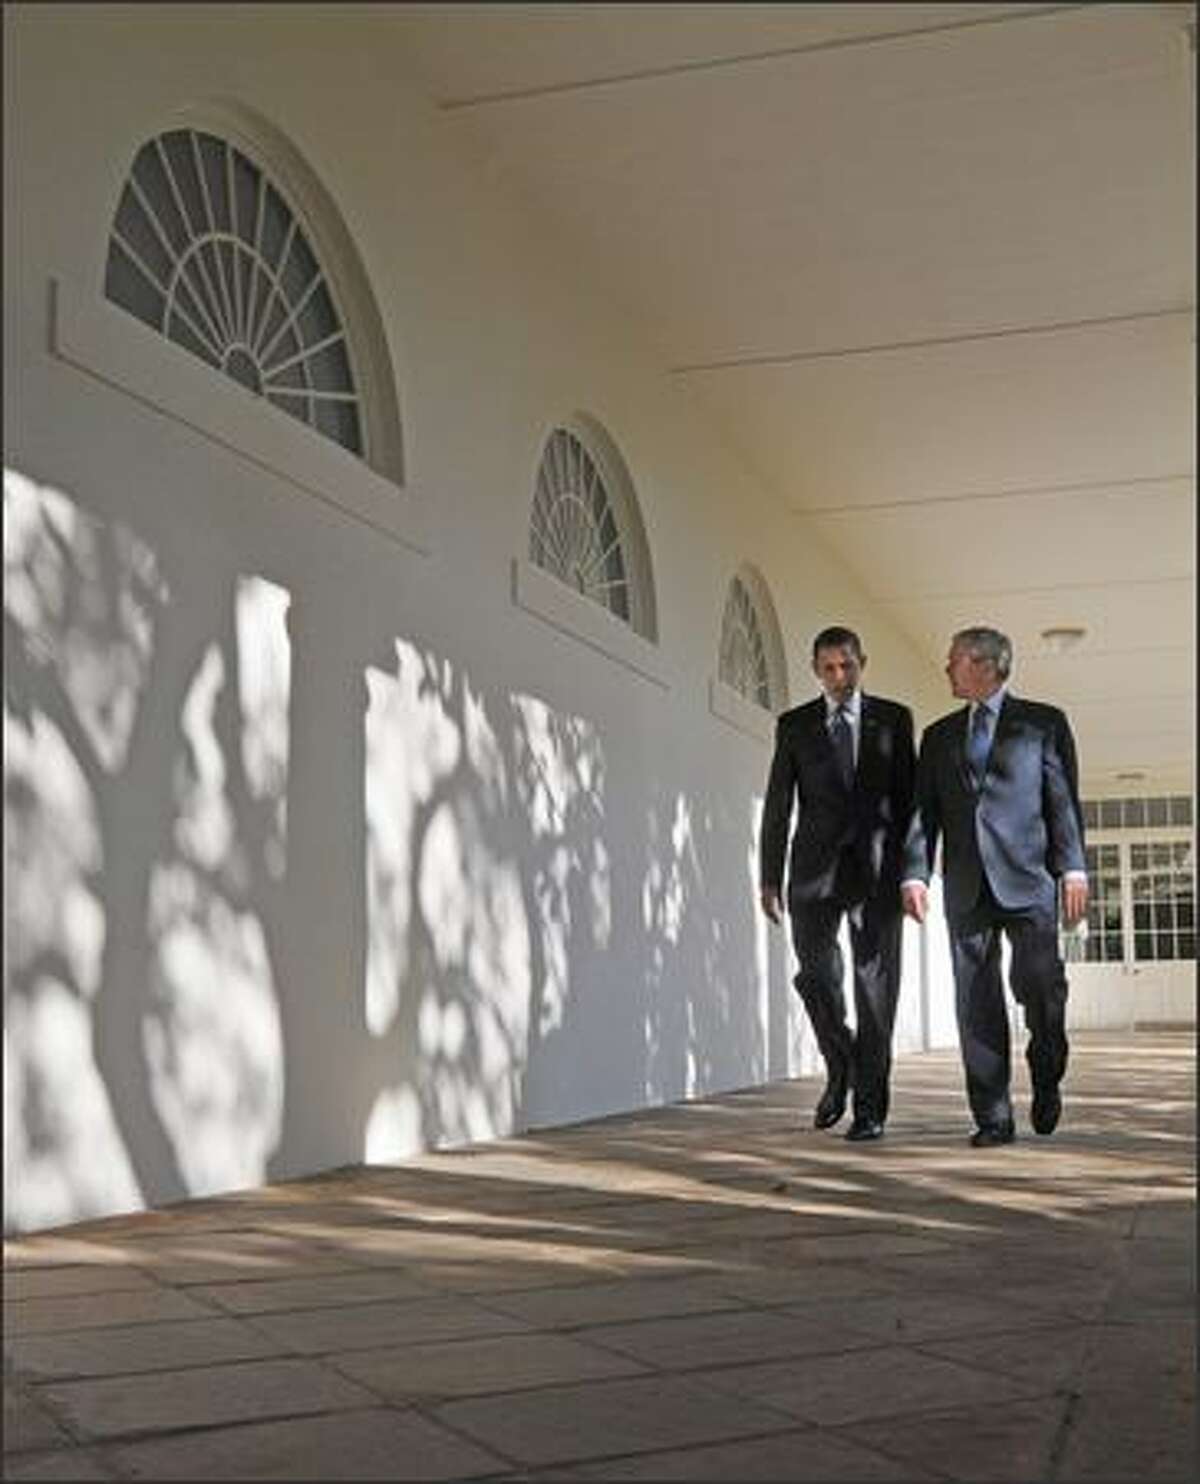 President George W. Bush and President-elect Barack Obama walk through the colonnade on Monday to the Oval Office at the White House in Washington, D.C.